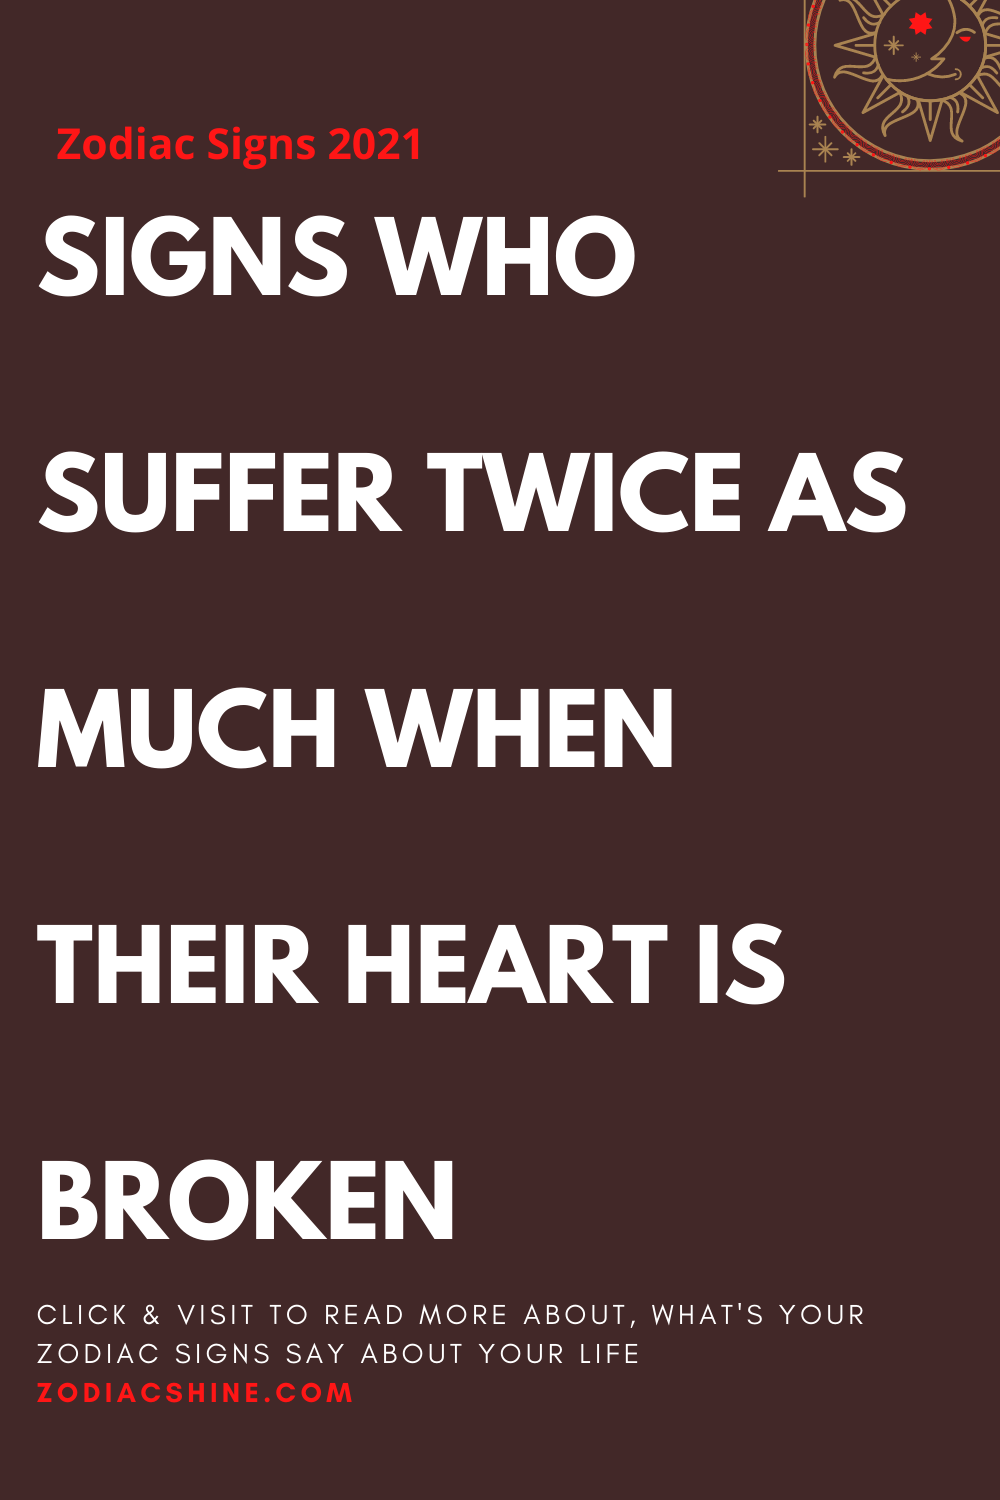 SIGNS WHO SUFFER TWICE AS MUCH WHEN THEIR HEART IS BROKEN